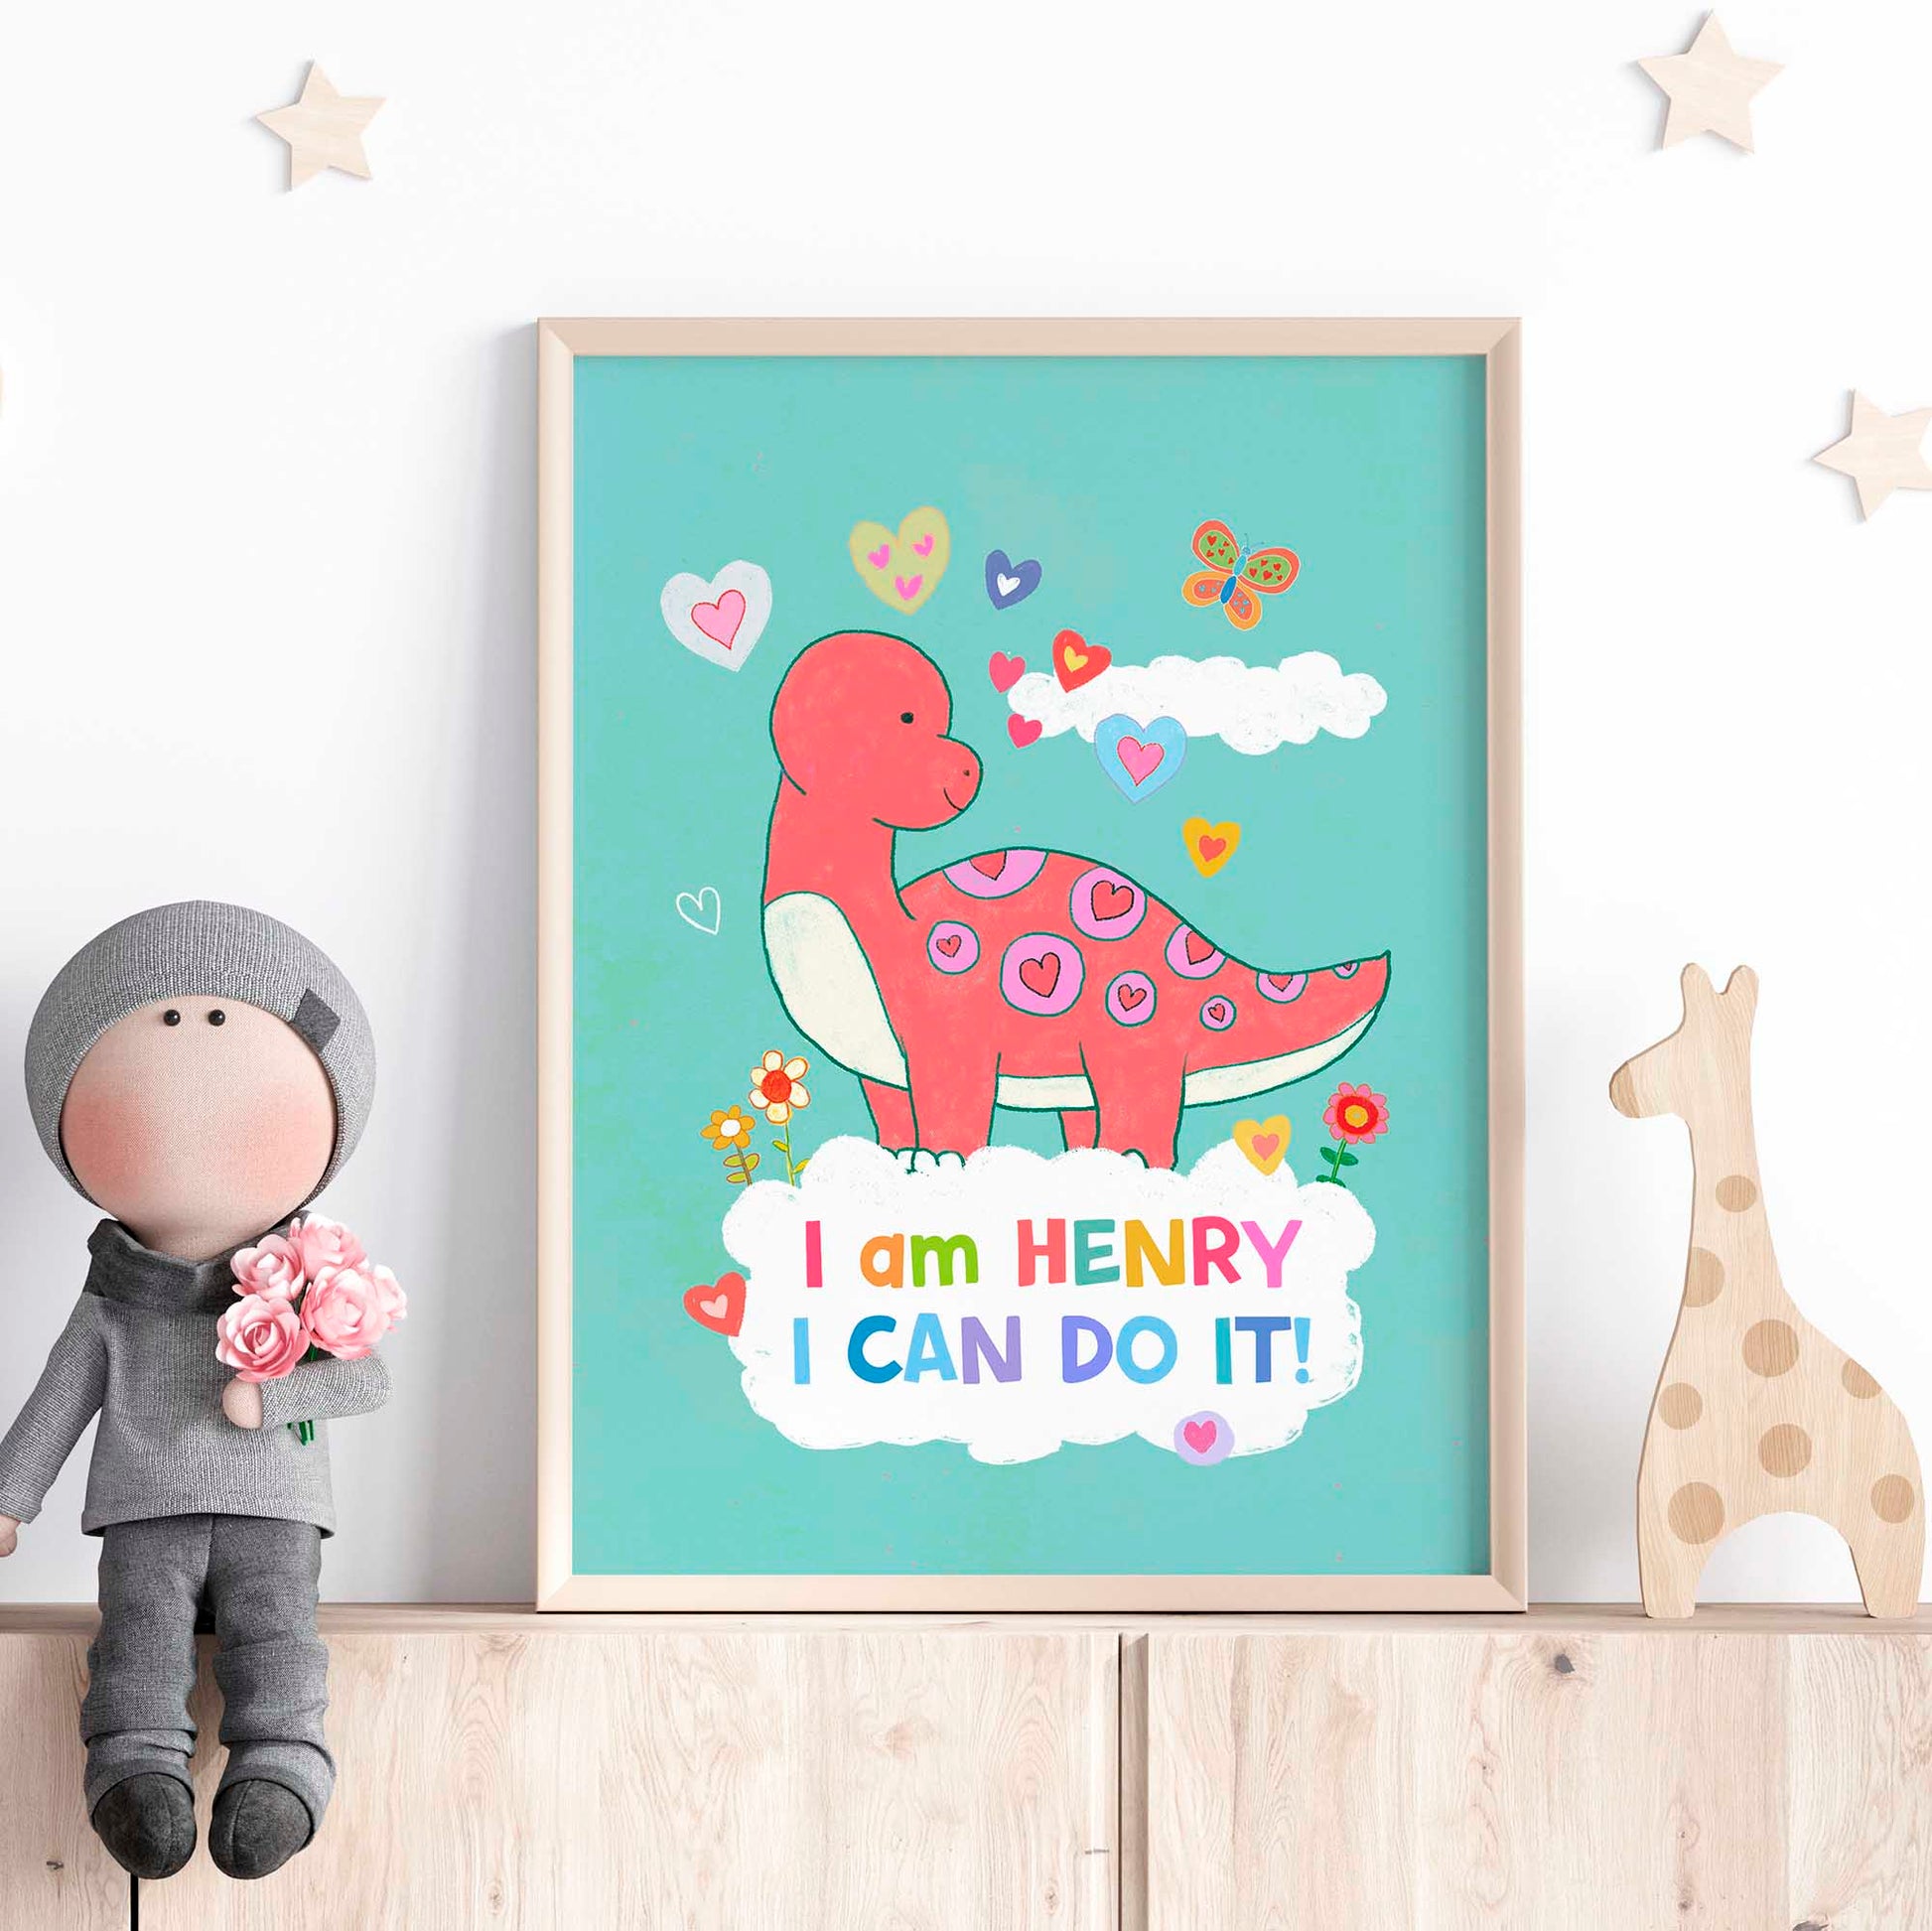 Enchanting dinosaur-themed kids' wall art with positive messages, ideal for decorating nurseries.